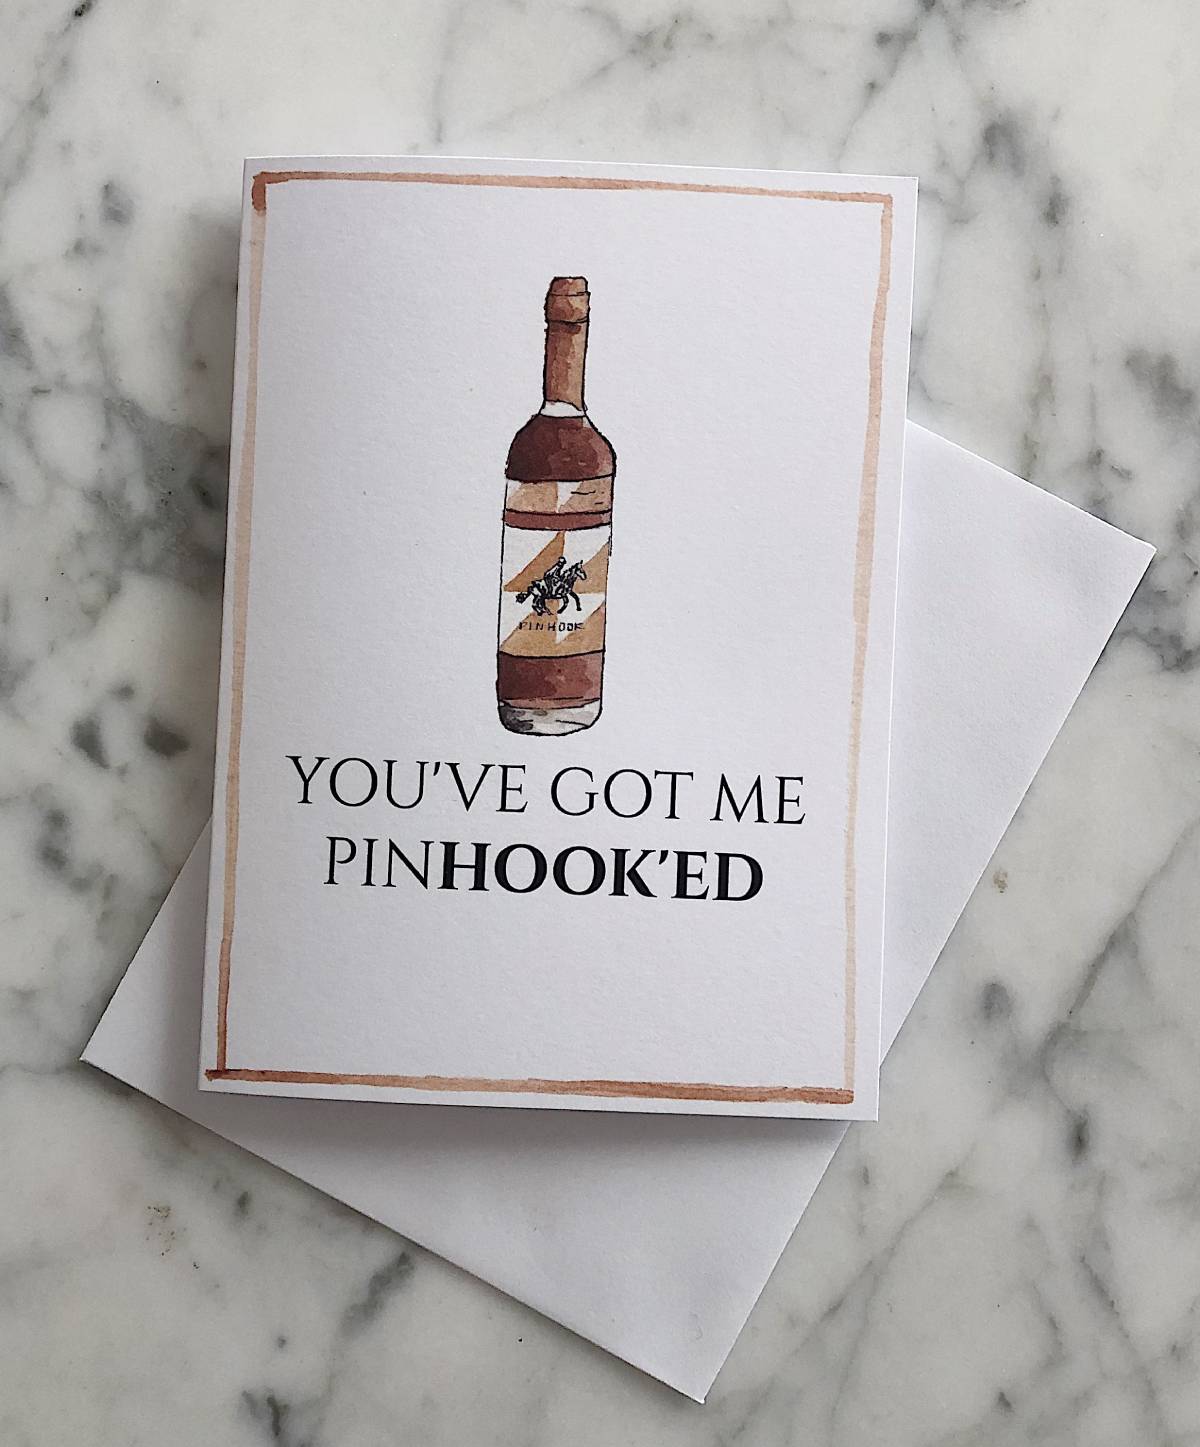 A white bourbon Valentine's Day card with an illustration of Pinhook bourbon and the text "you've got me pinhook'ed"